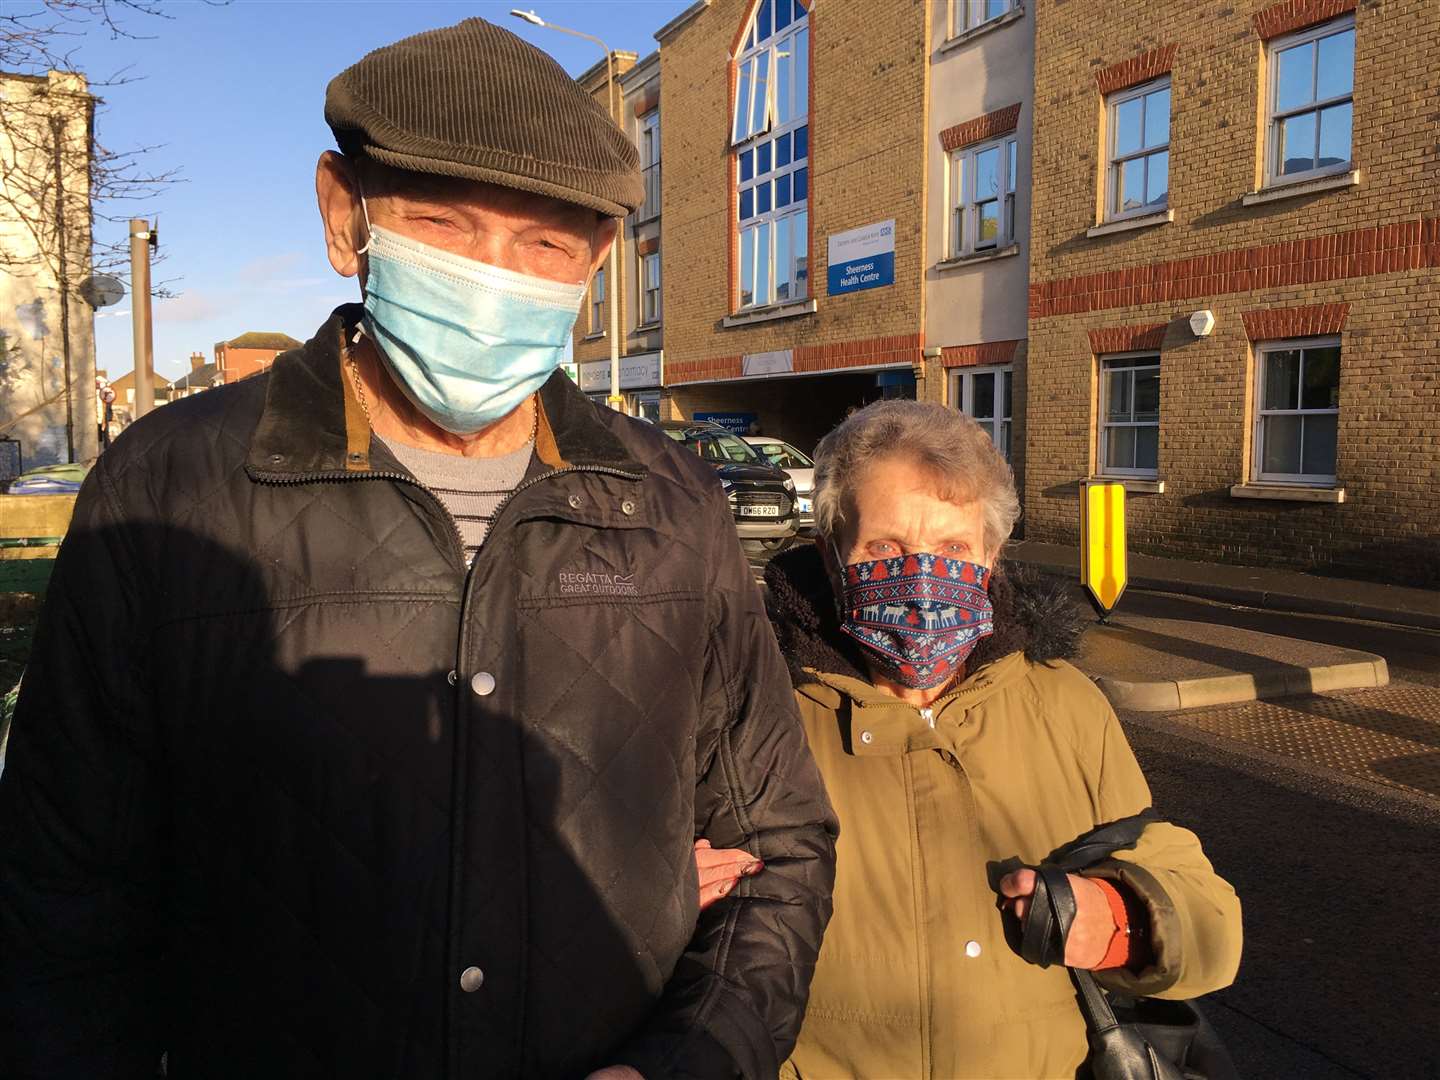 Patients John and Jean Carter after their covid vaccinations at the Sheerness Medical Centre on Sheppey